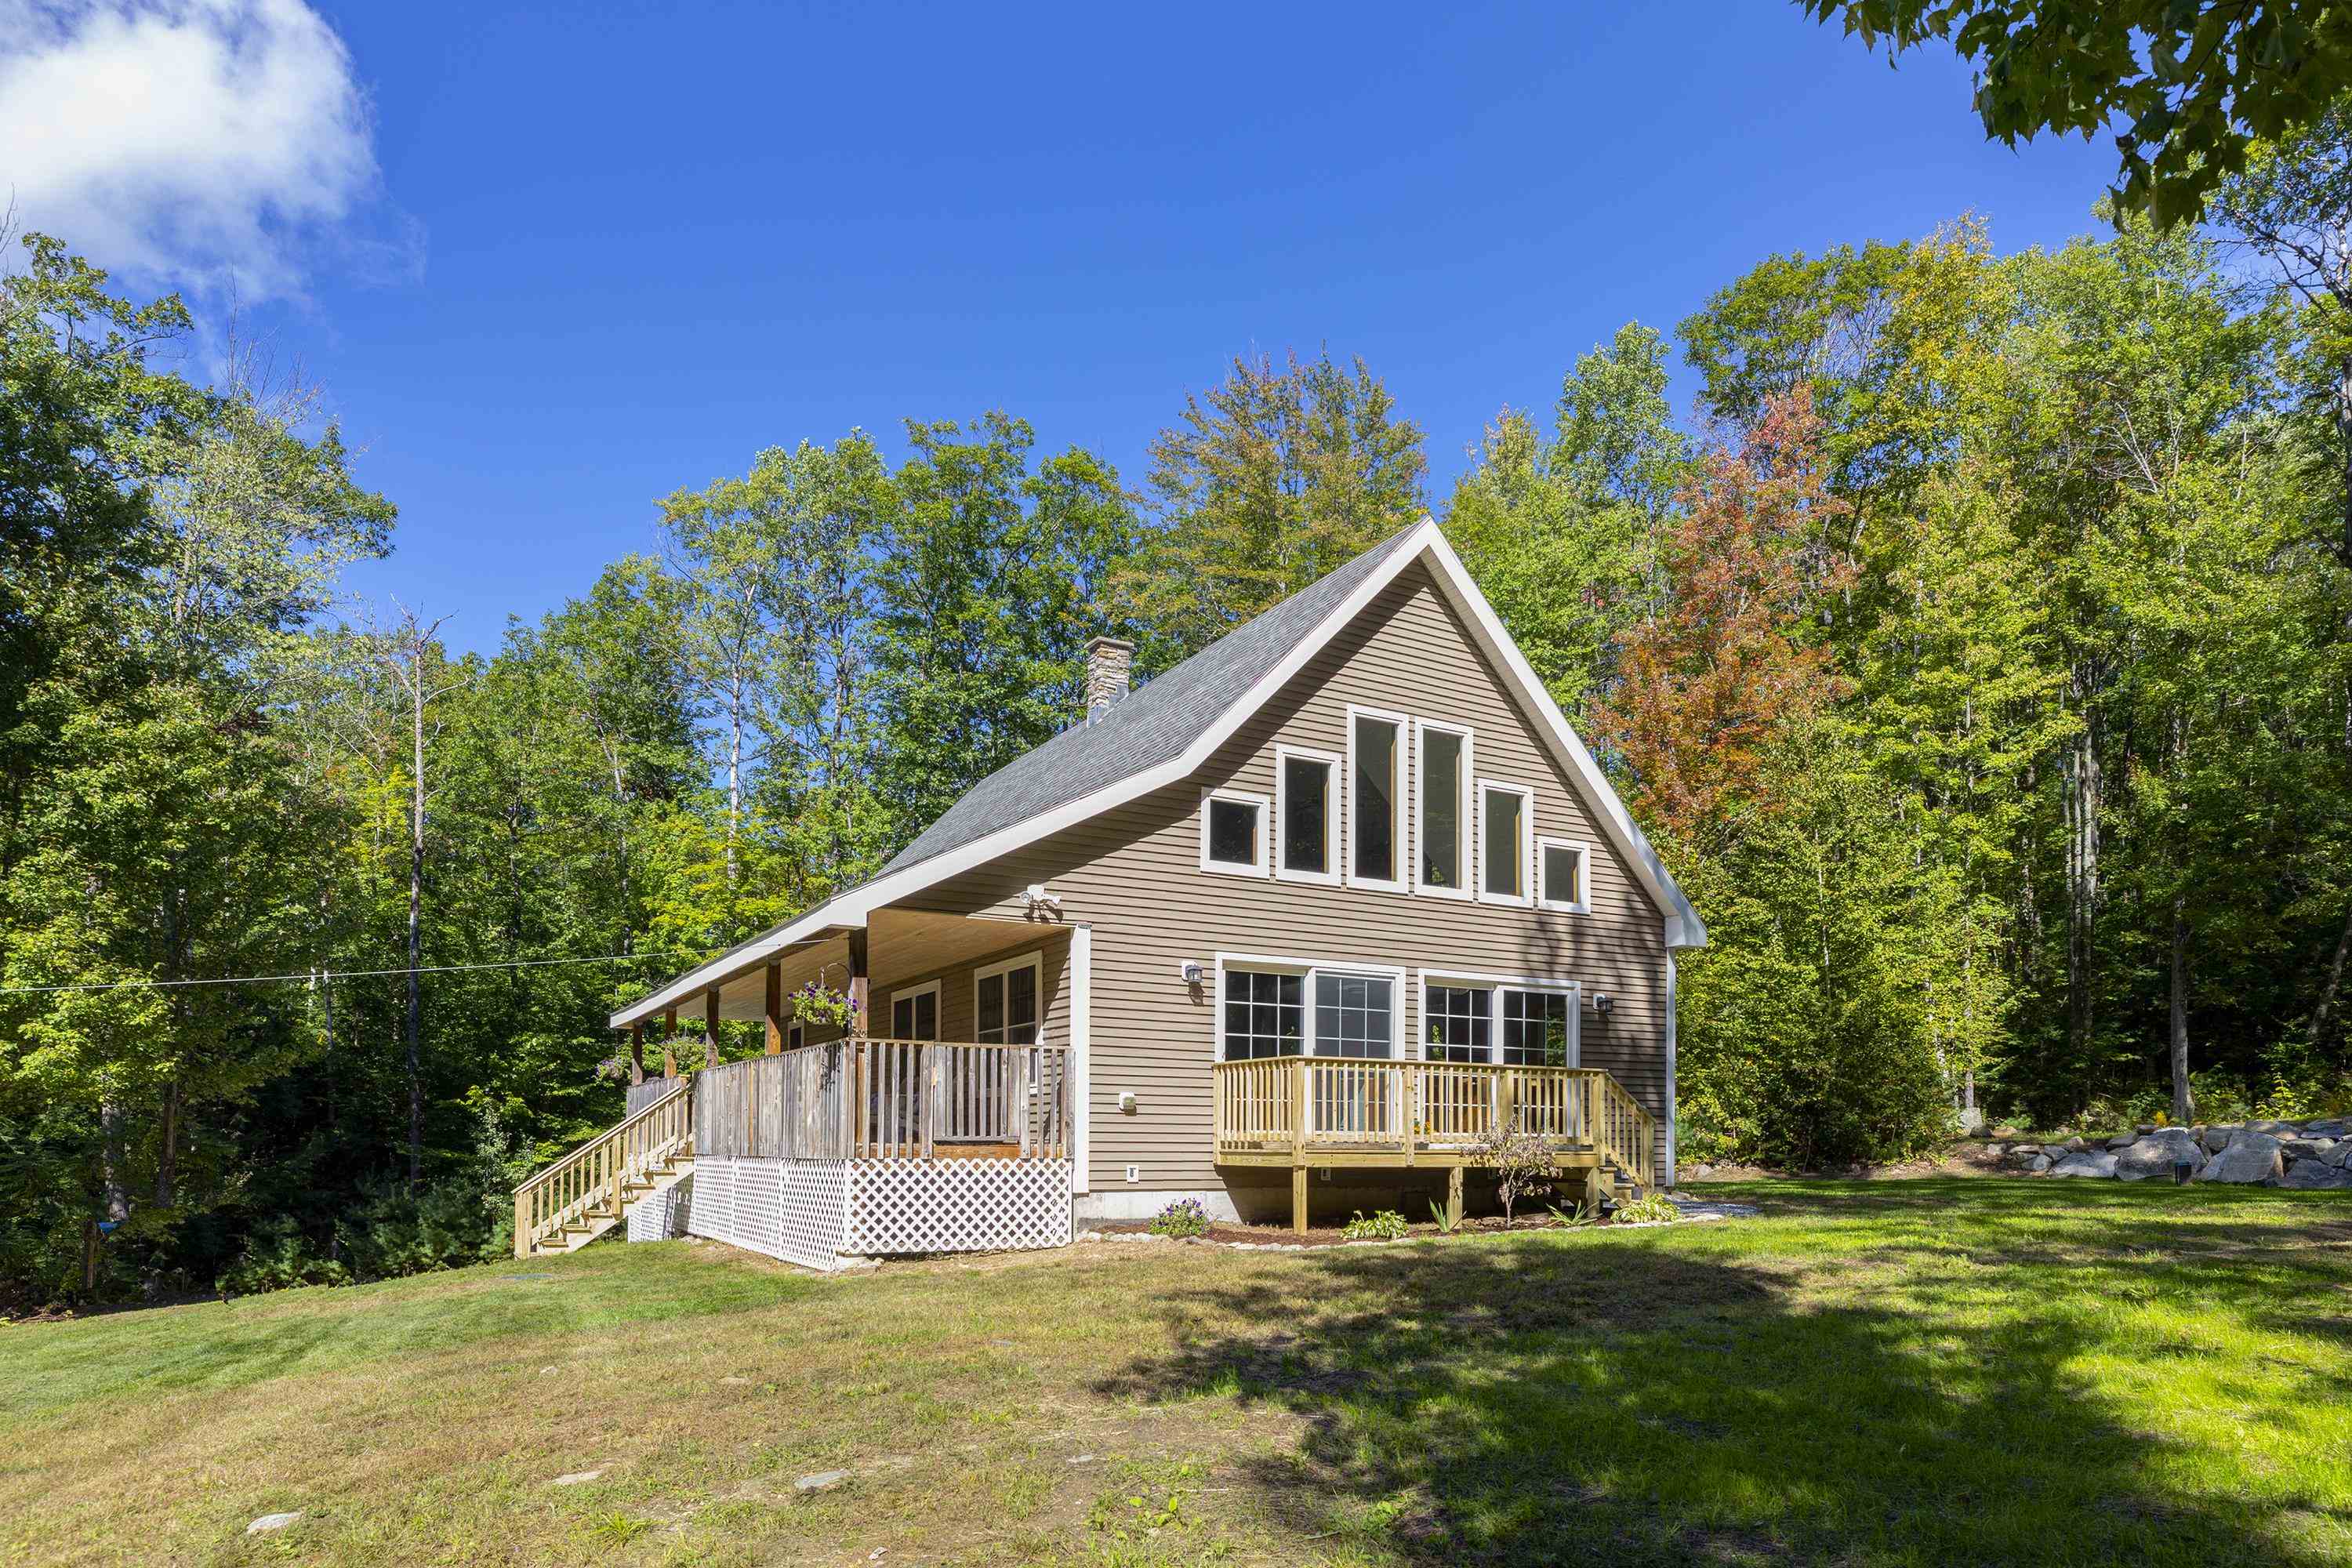 187 Kluge Road, Enfield, New Hampshire, NH 03748, 3 Bedrooms Bedrooms, 7 Rooms Rooms,2 BathroomsBathrooms,Single Family,For Sale,4931489